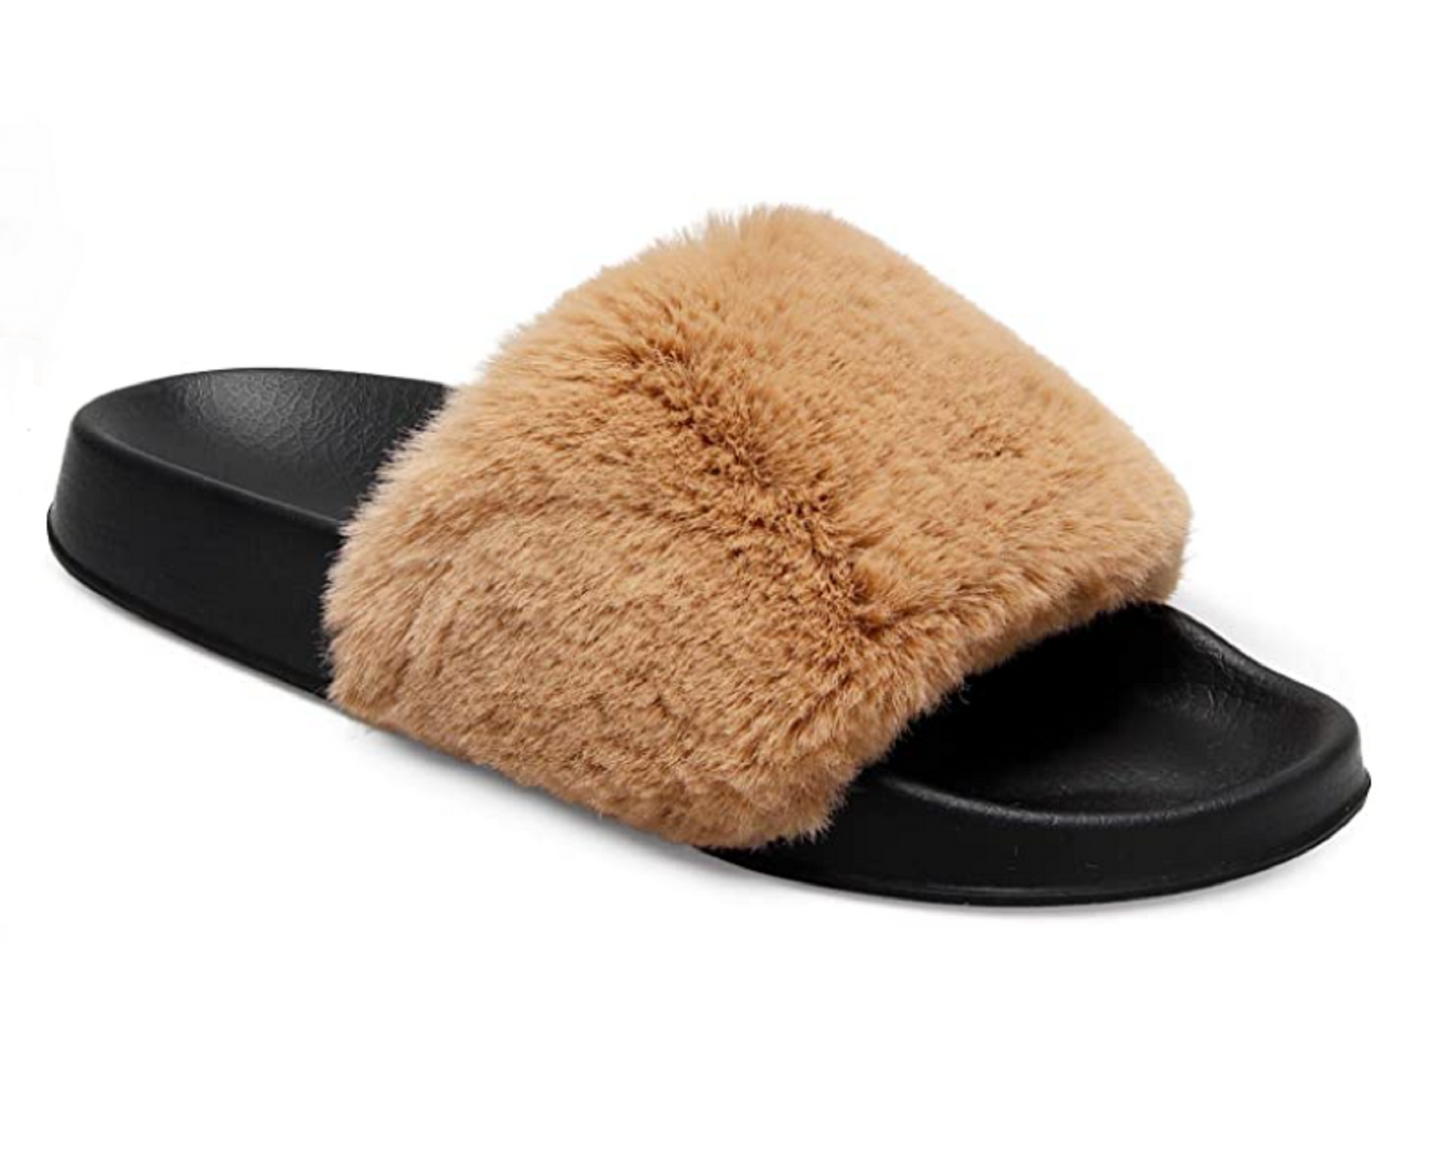 Personalized Fur Slippers